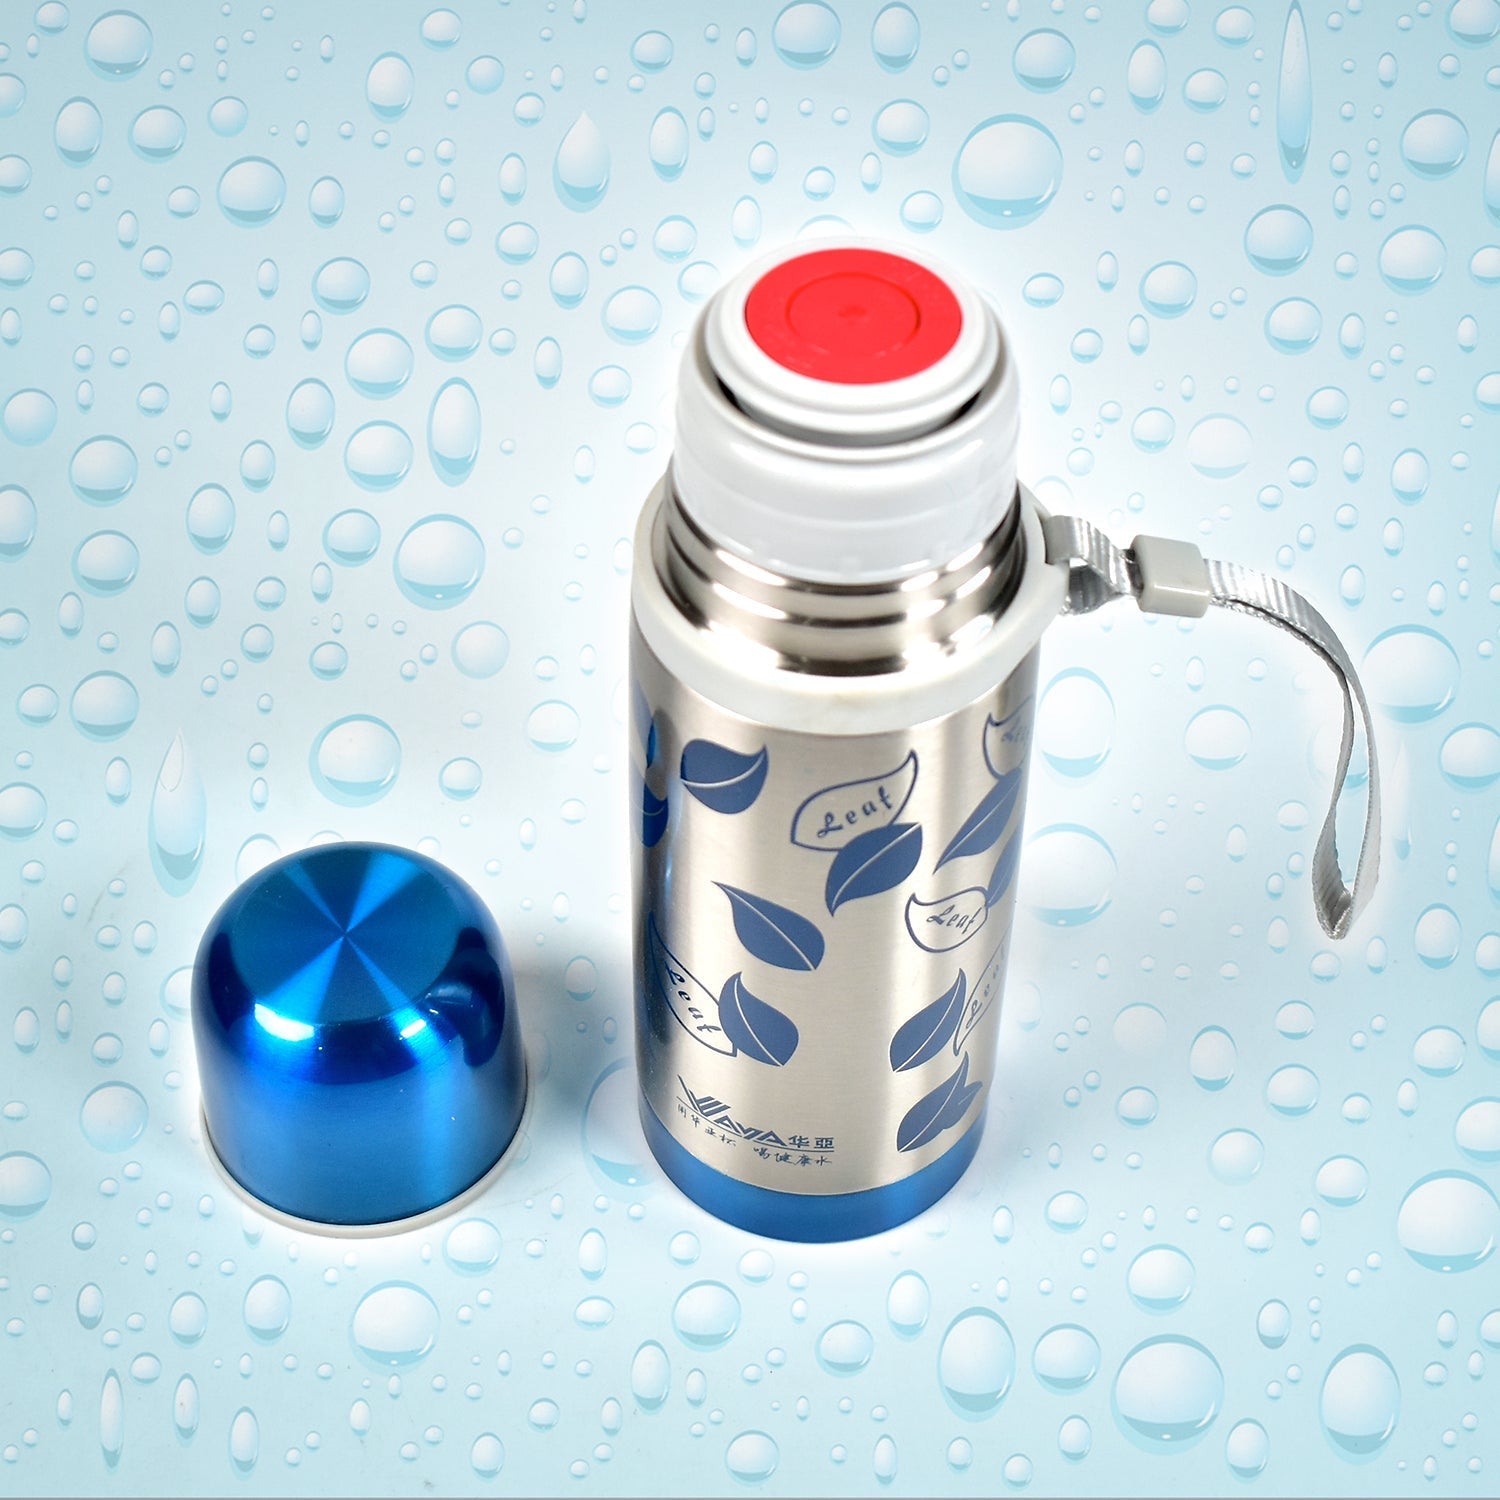 6822 Stainless Steel Insulated Water Bottle 350ml (1pc). DeoDap